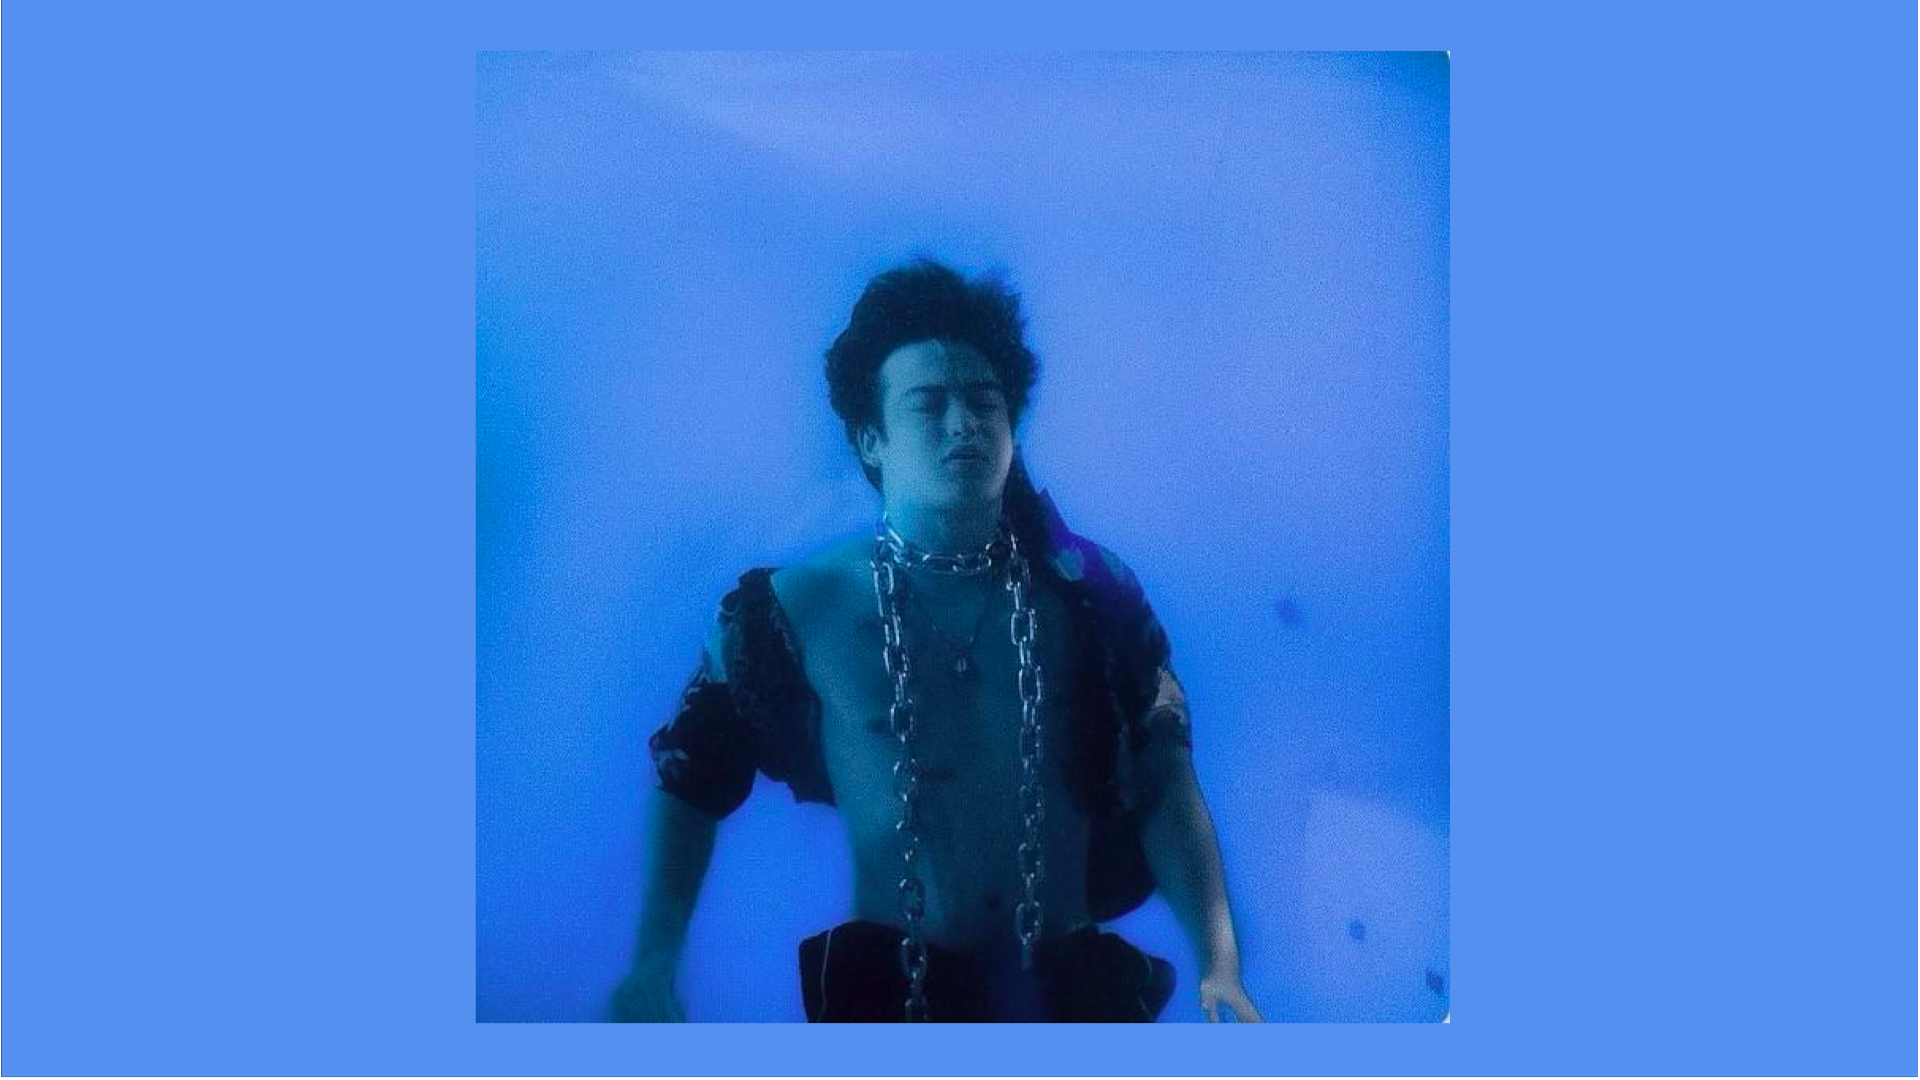 A Review of "In Tongues" EP by Joji | KHDX Radio